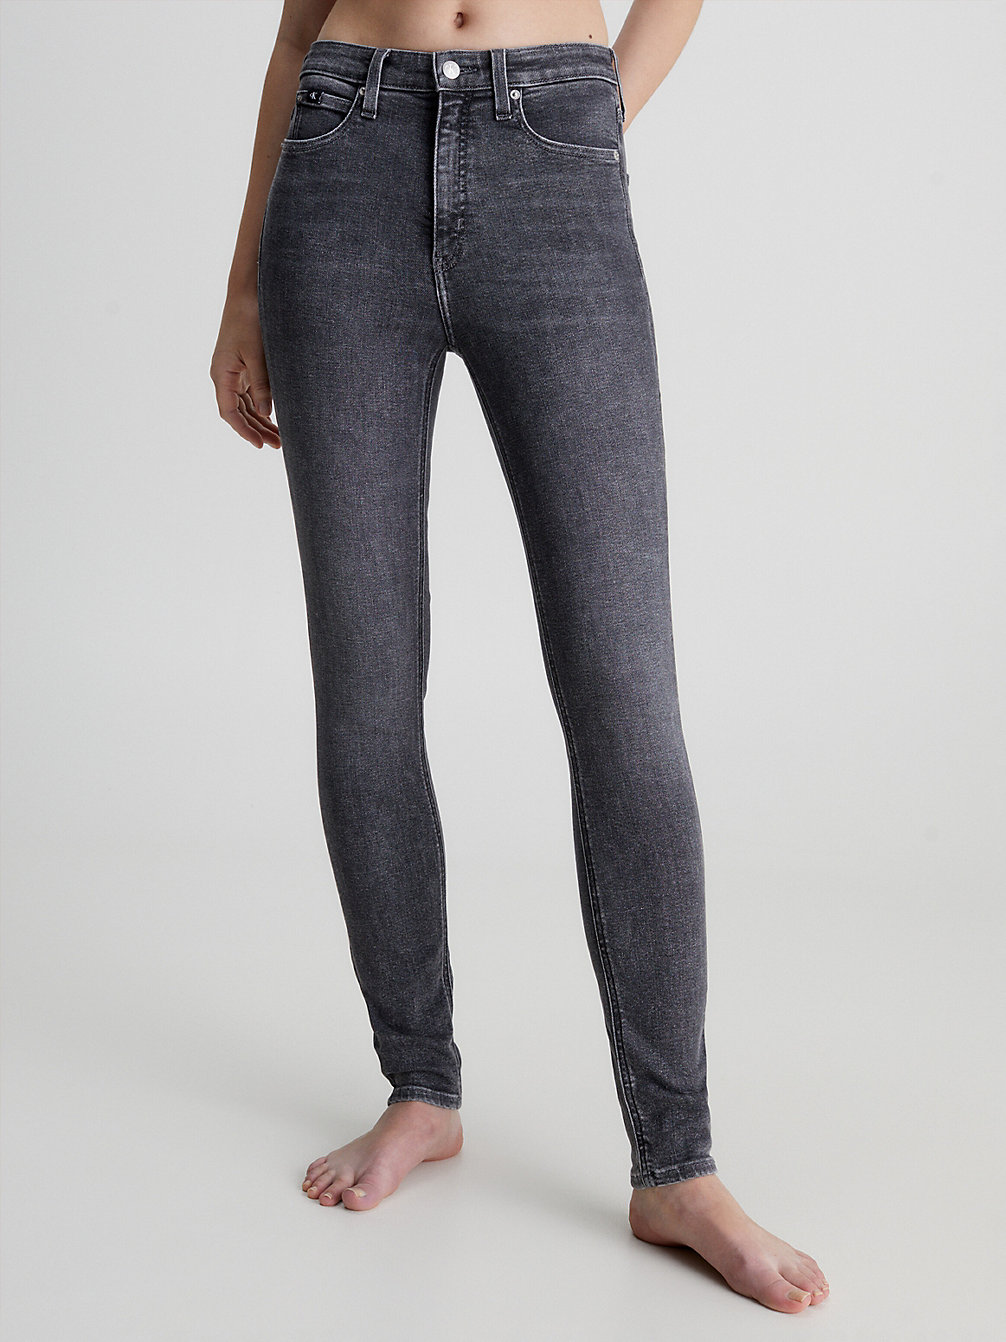 High Rise Skinny Jeans > DENIM GREY > undefined mujeres > Calvin Klein